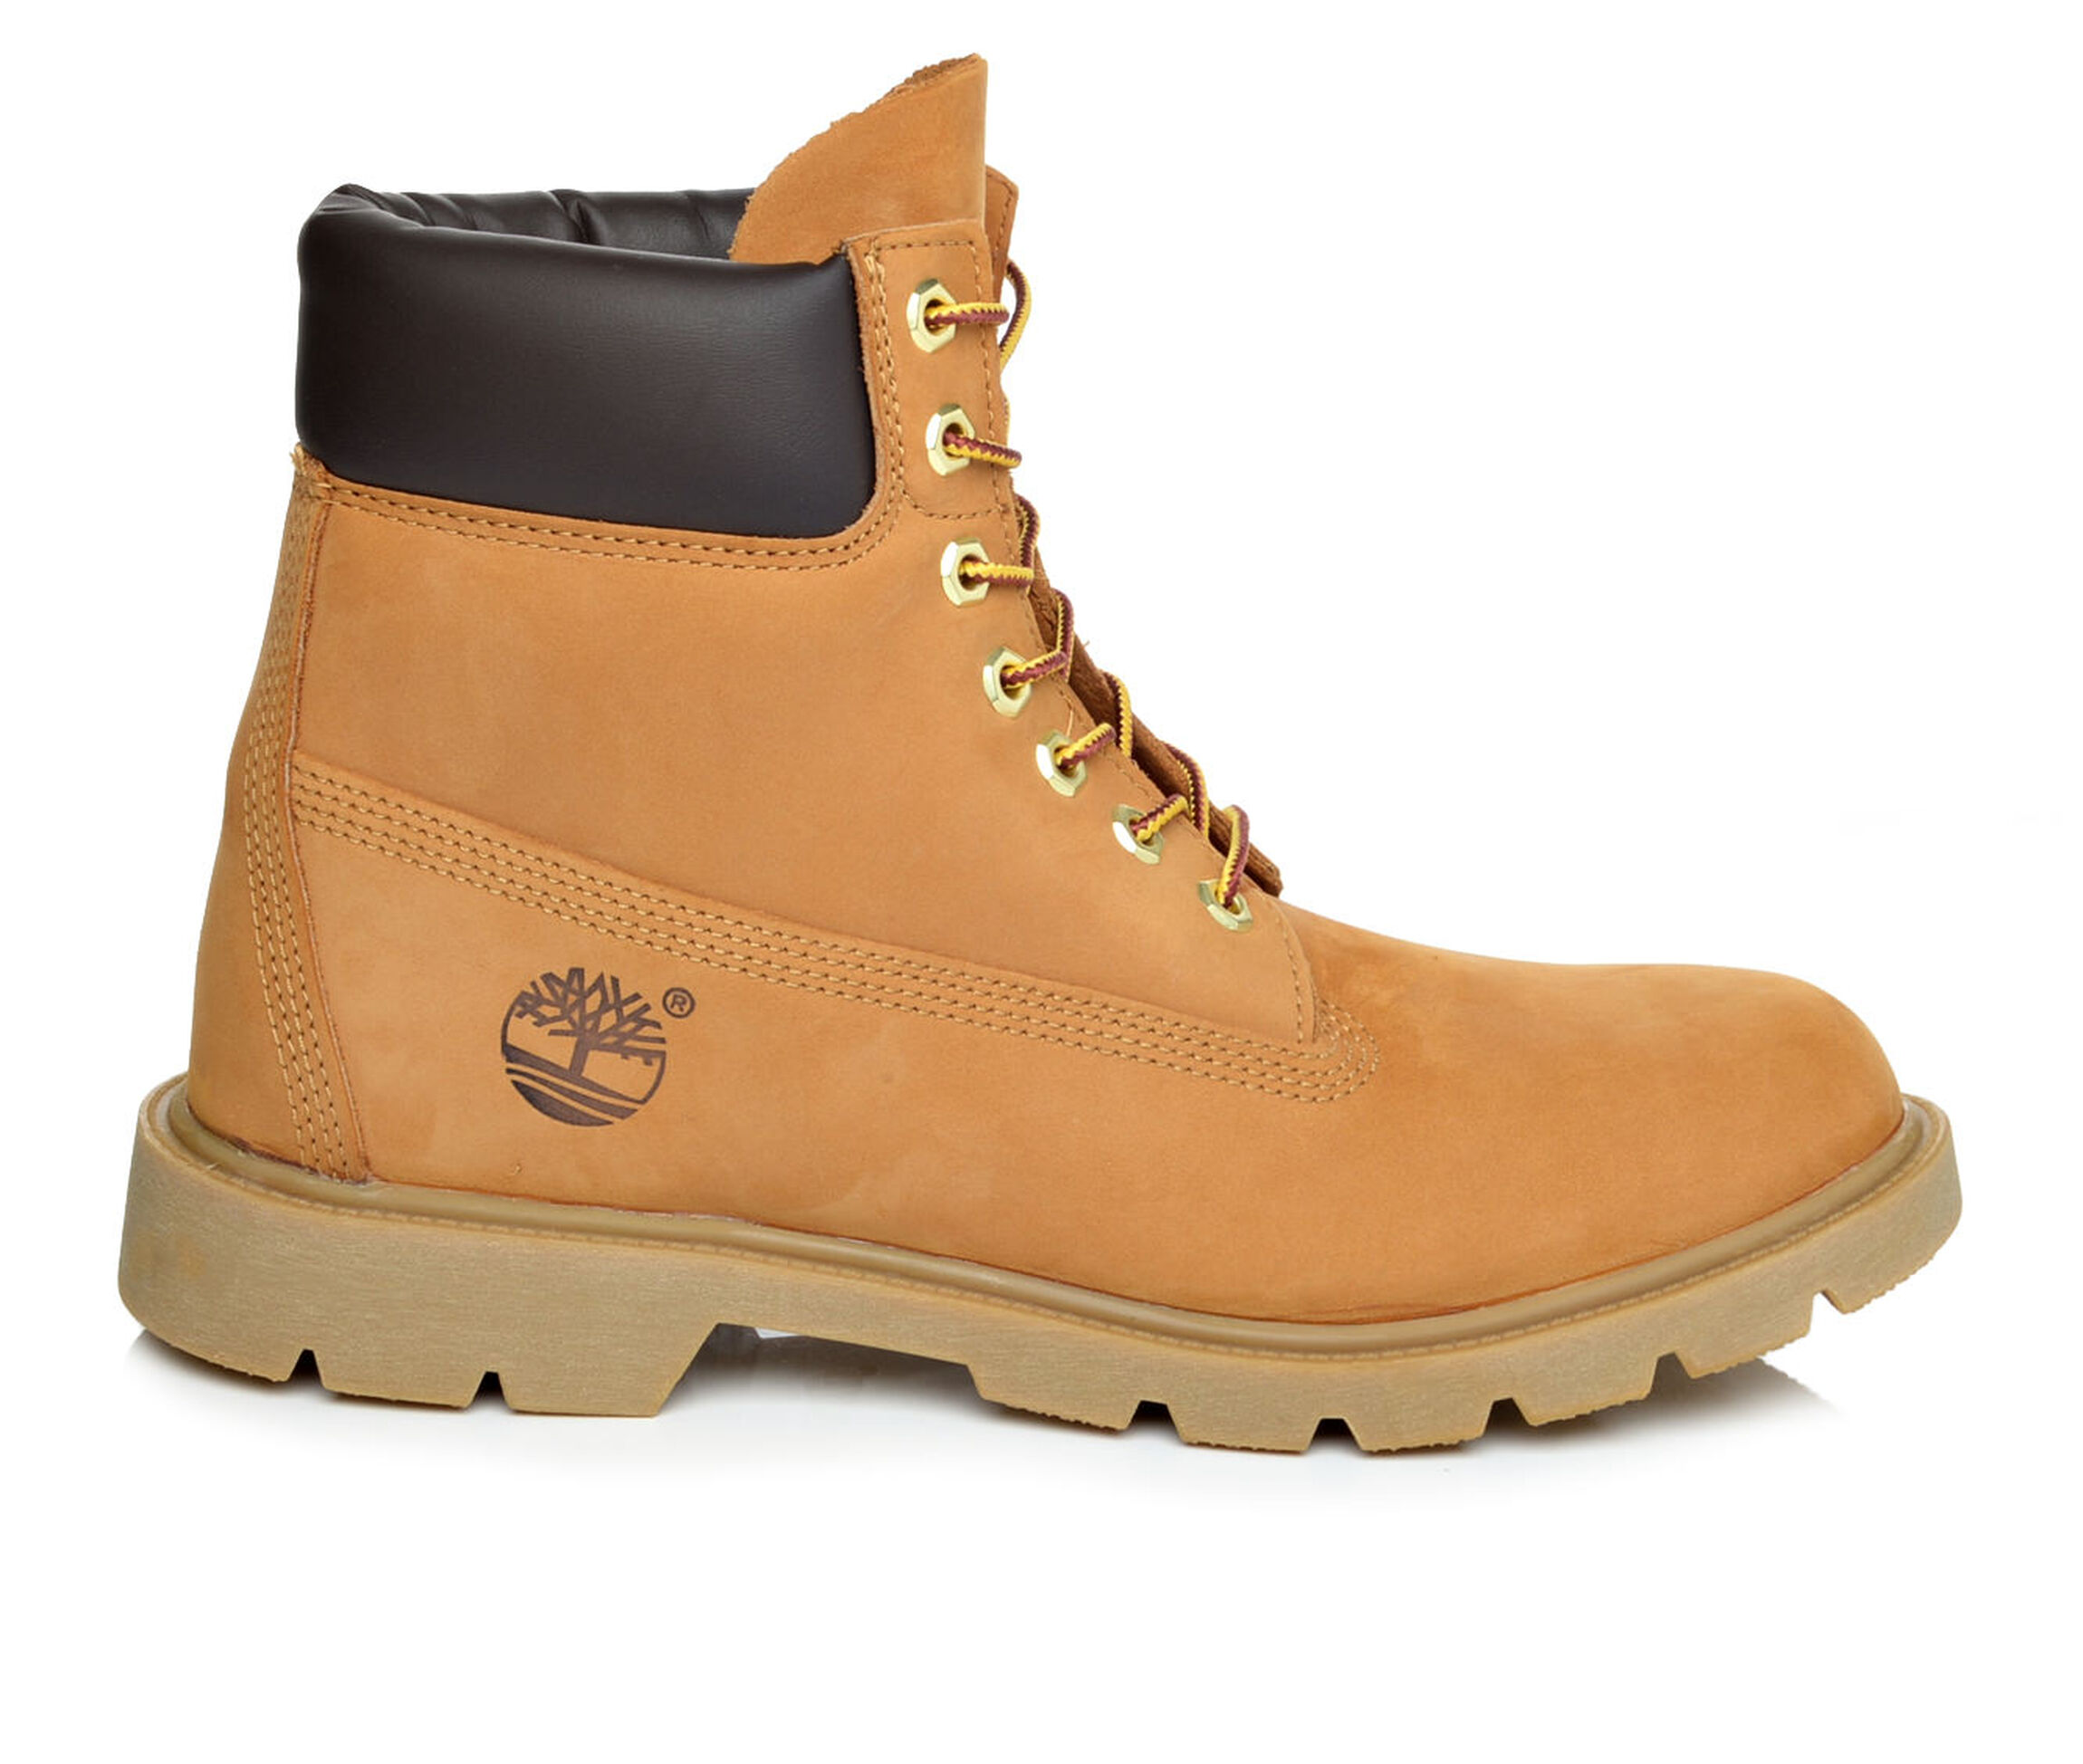 Timberland Boots & Shoes | Shoe Carnival